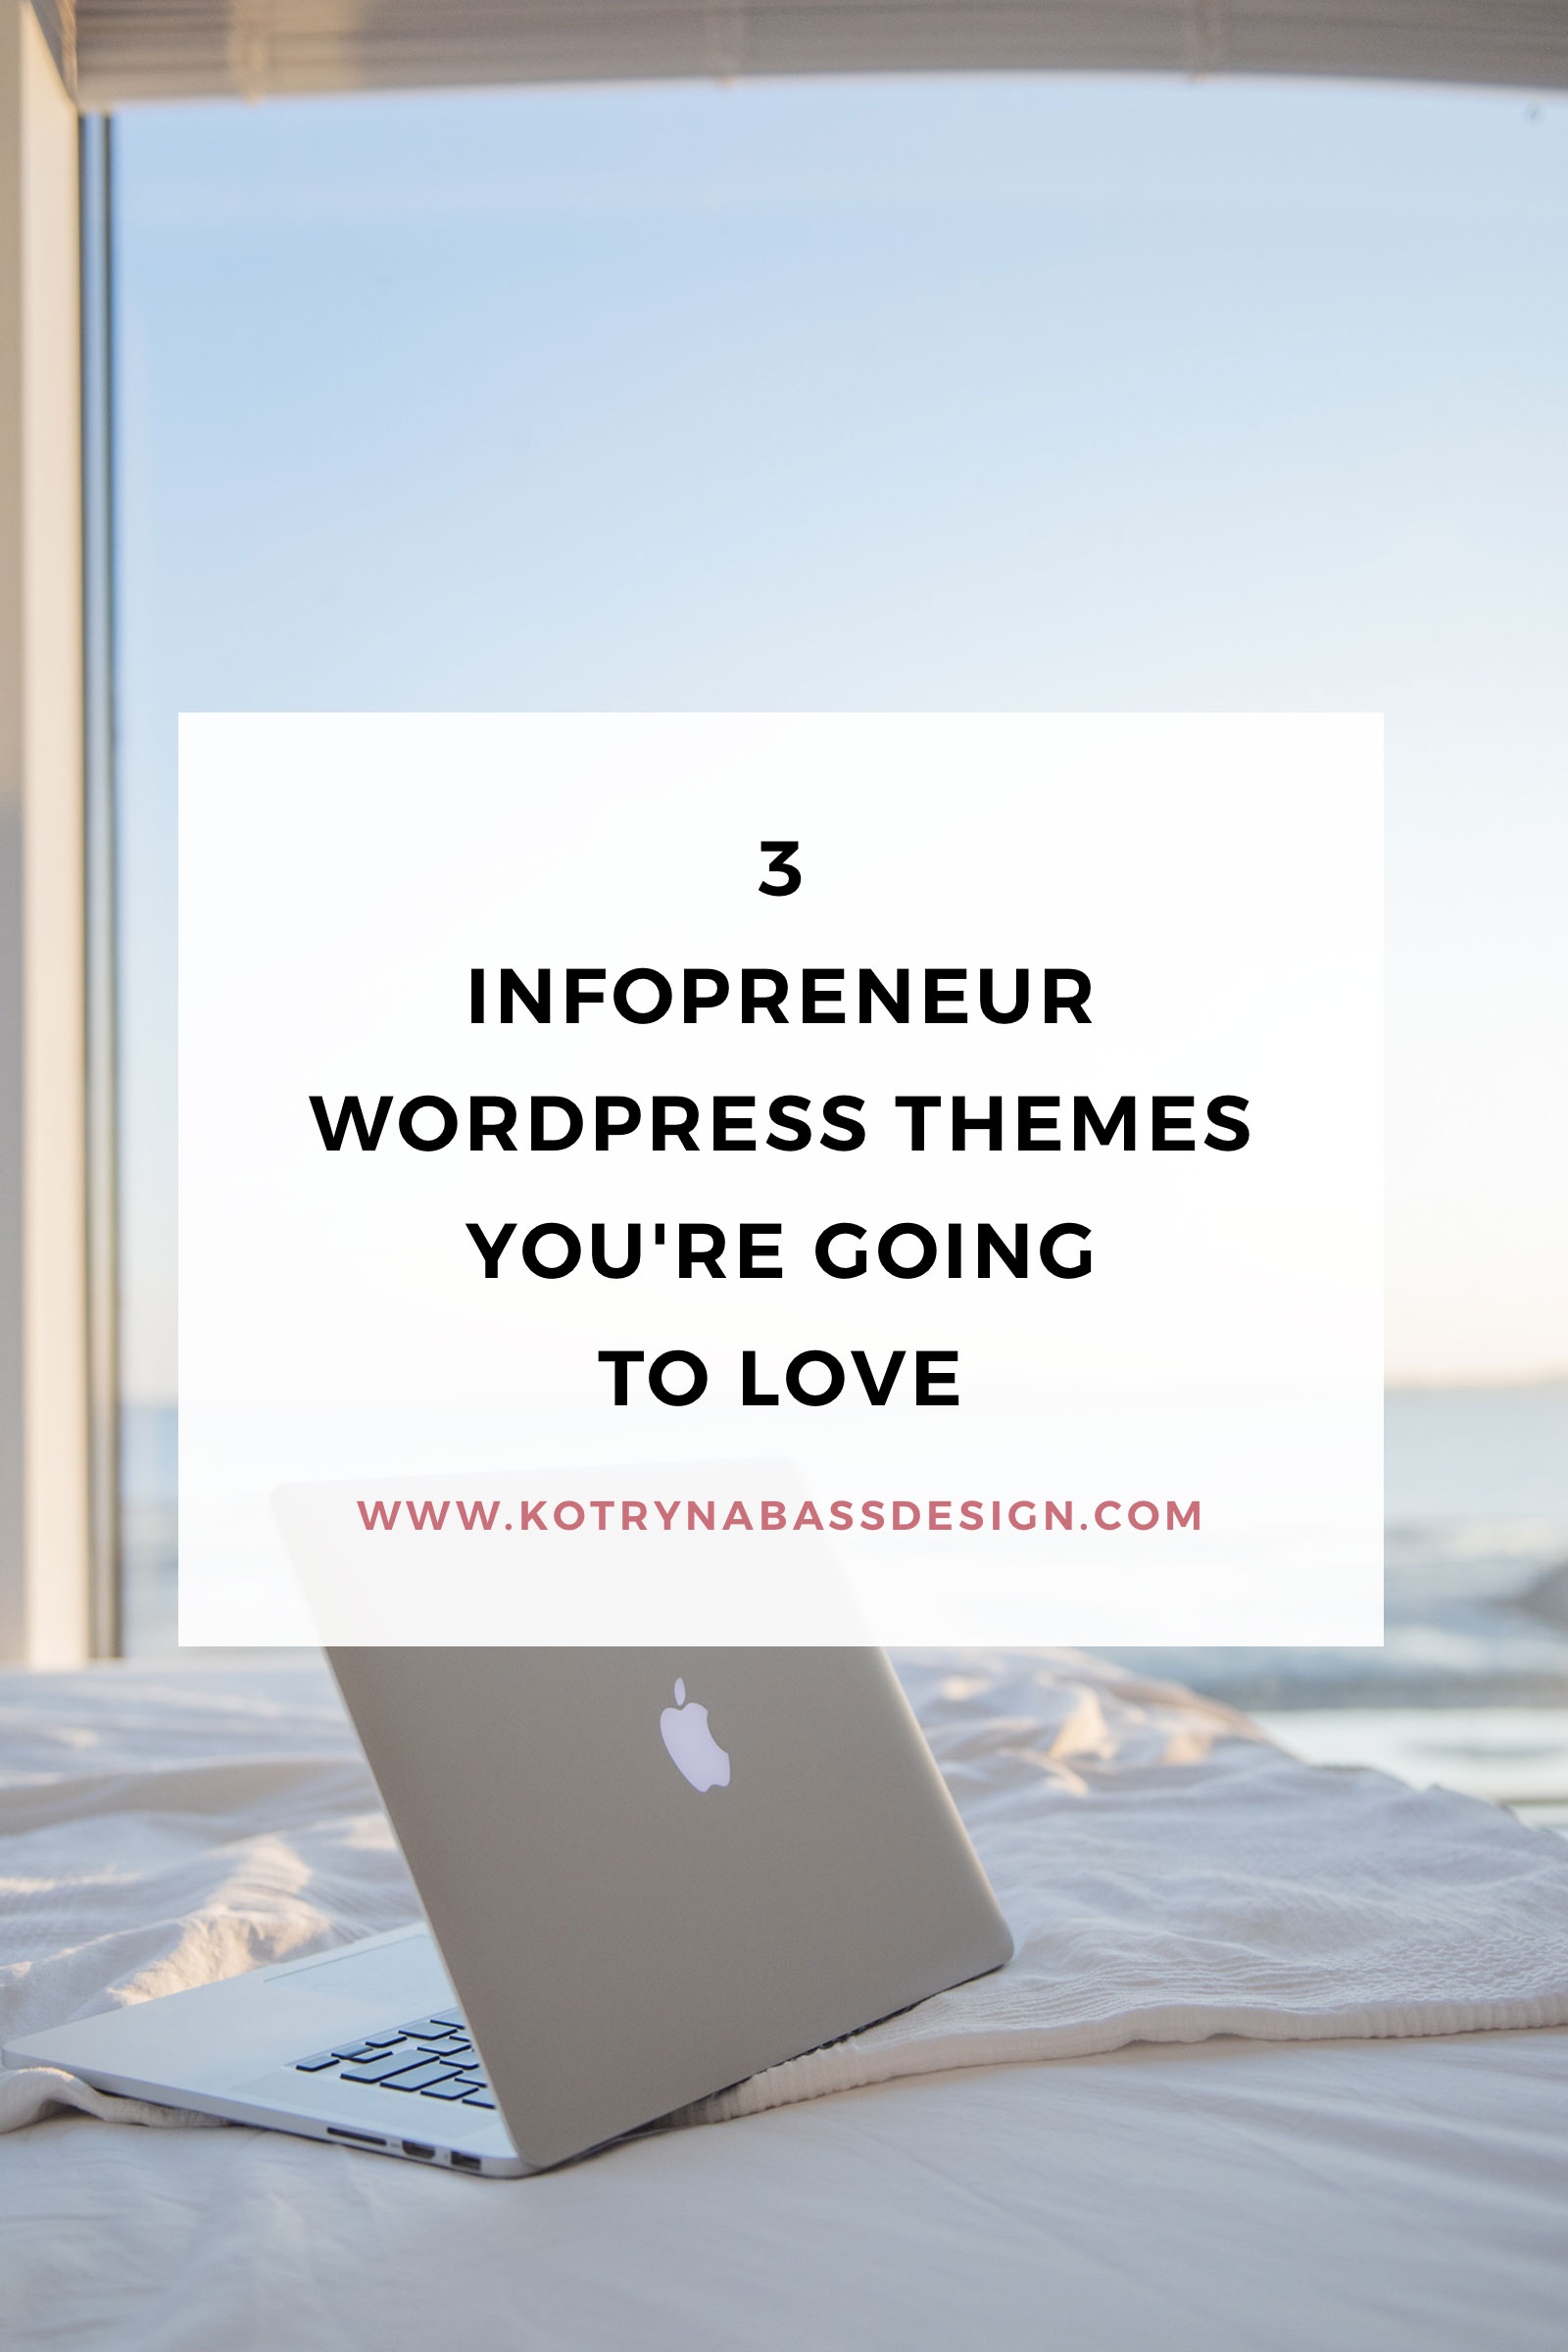 3 Infopreneur WordPress Themes You’re Going To Love